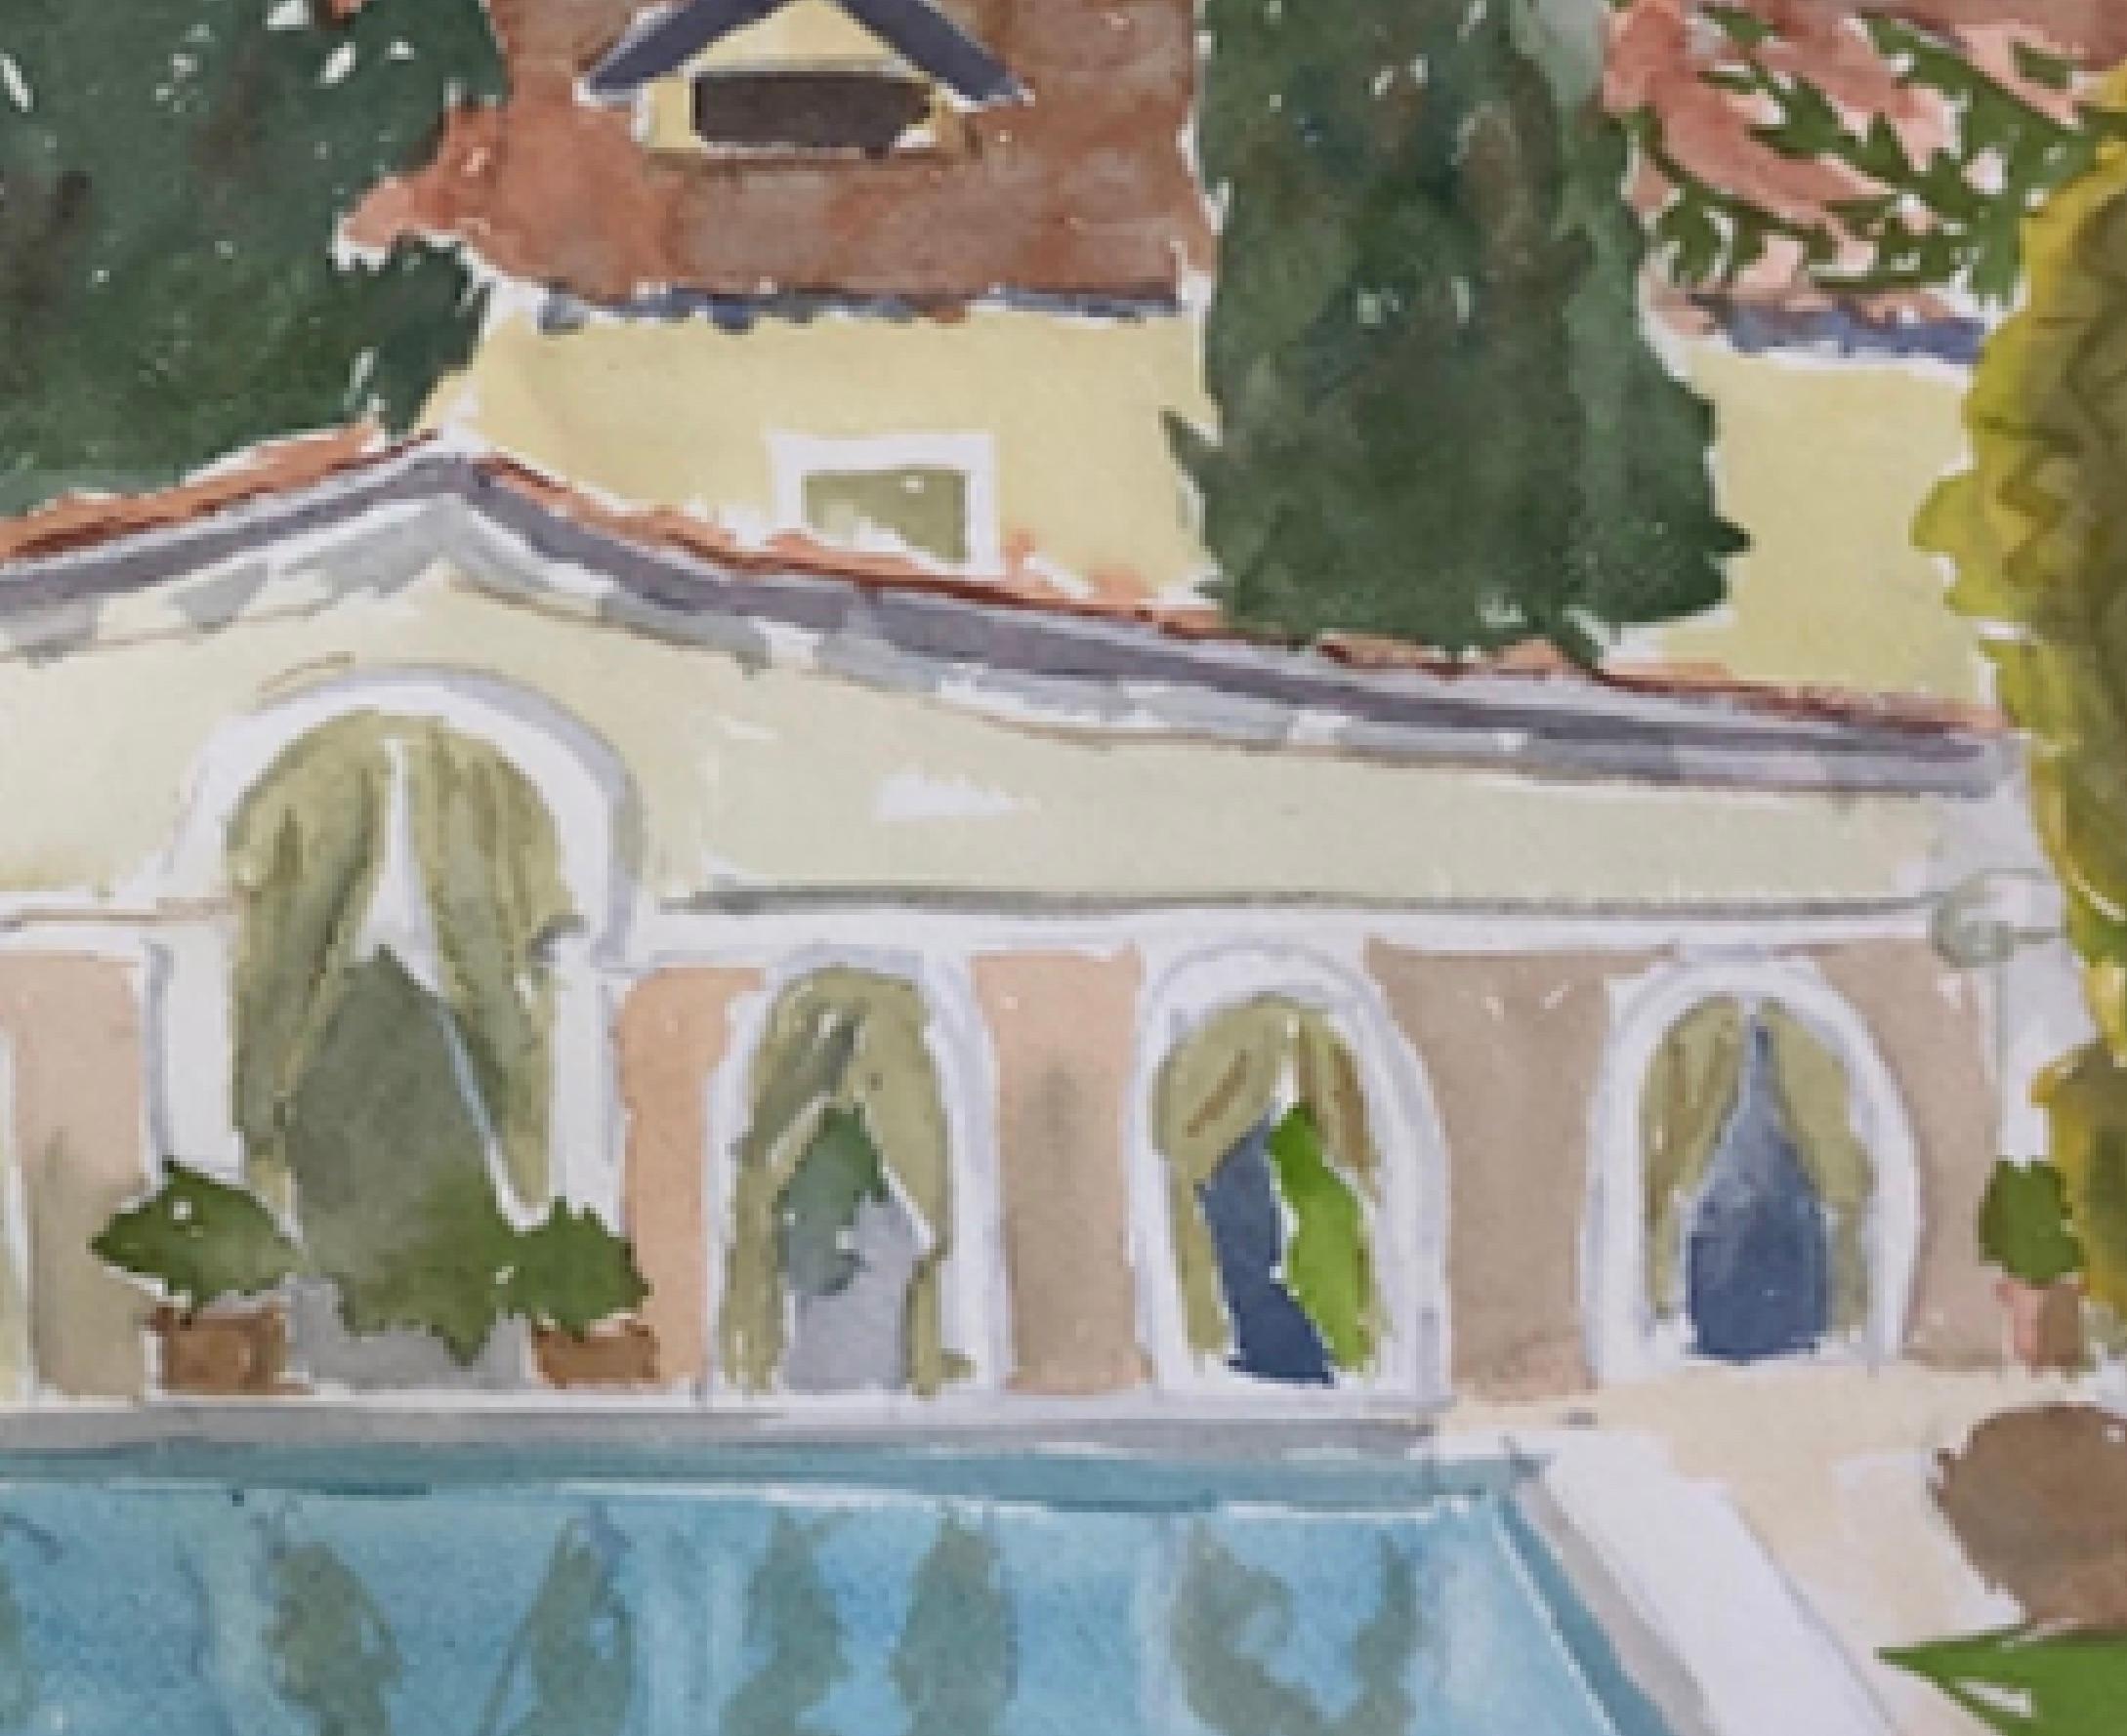 Original watercolor artwork by artist Peggy Kennedy.

From the Artist: “While on a painting trip to Venice, I arranged to paint in several private gardens to show hidden pleasures. Fortuny has a factory and shop with a large garden and swimming pool